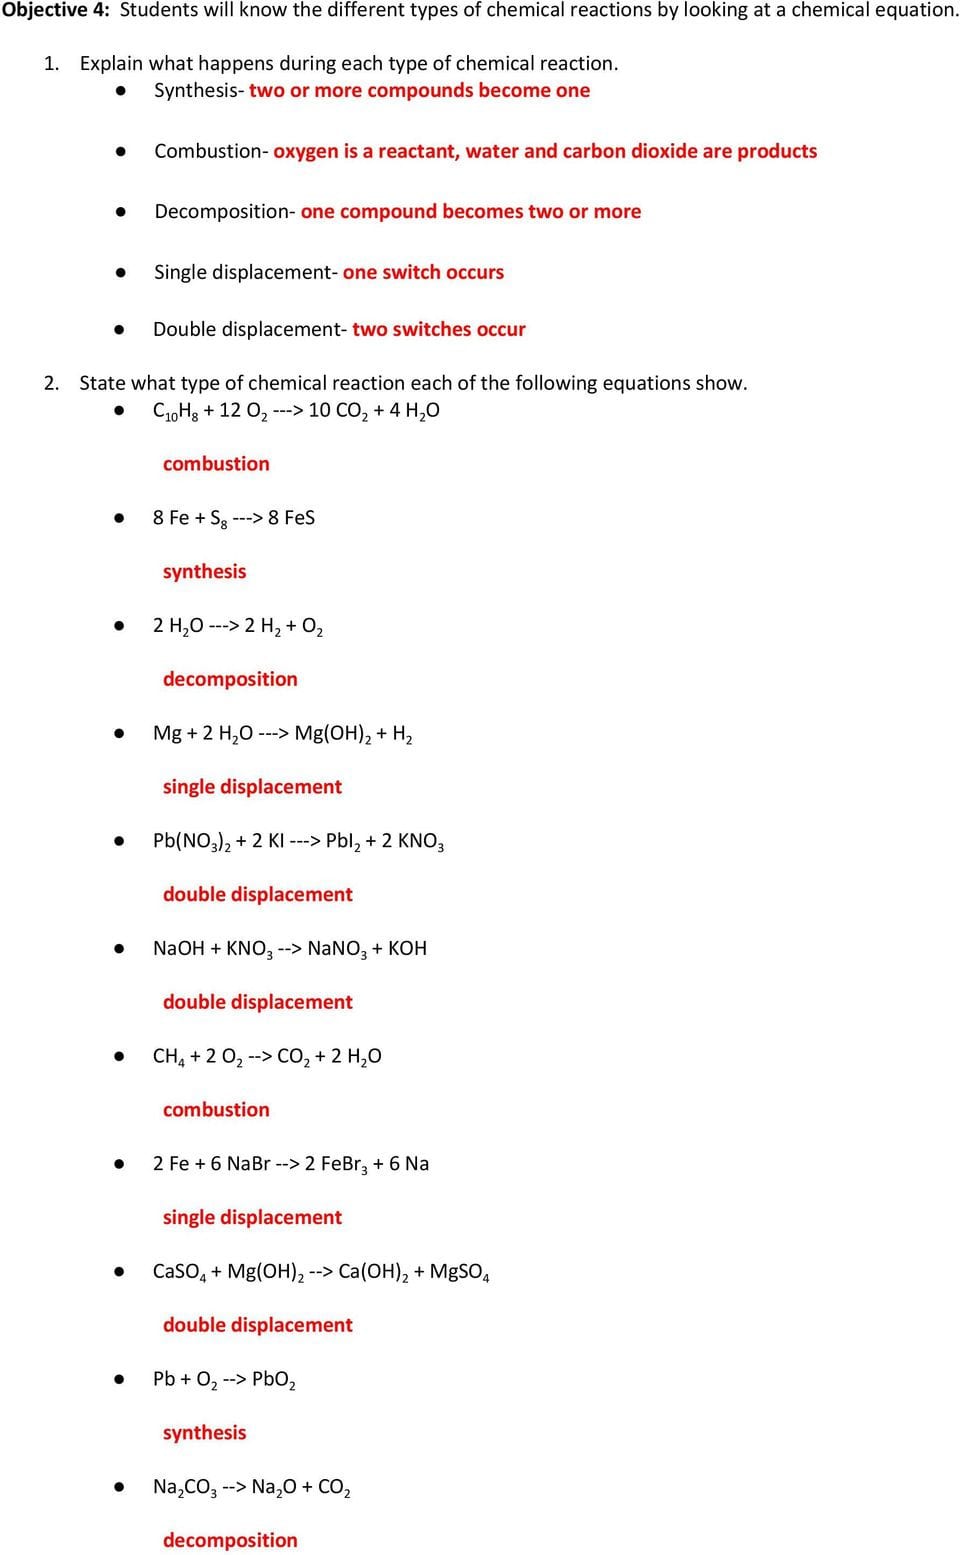 111-describing-chemical-reactions-worksheet-answers-pearson-db-excel